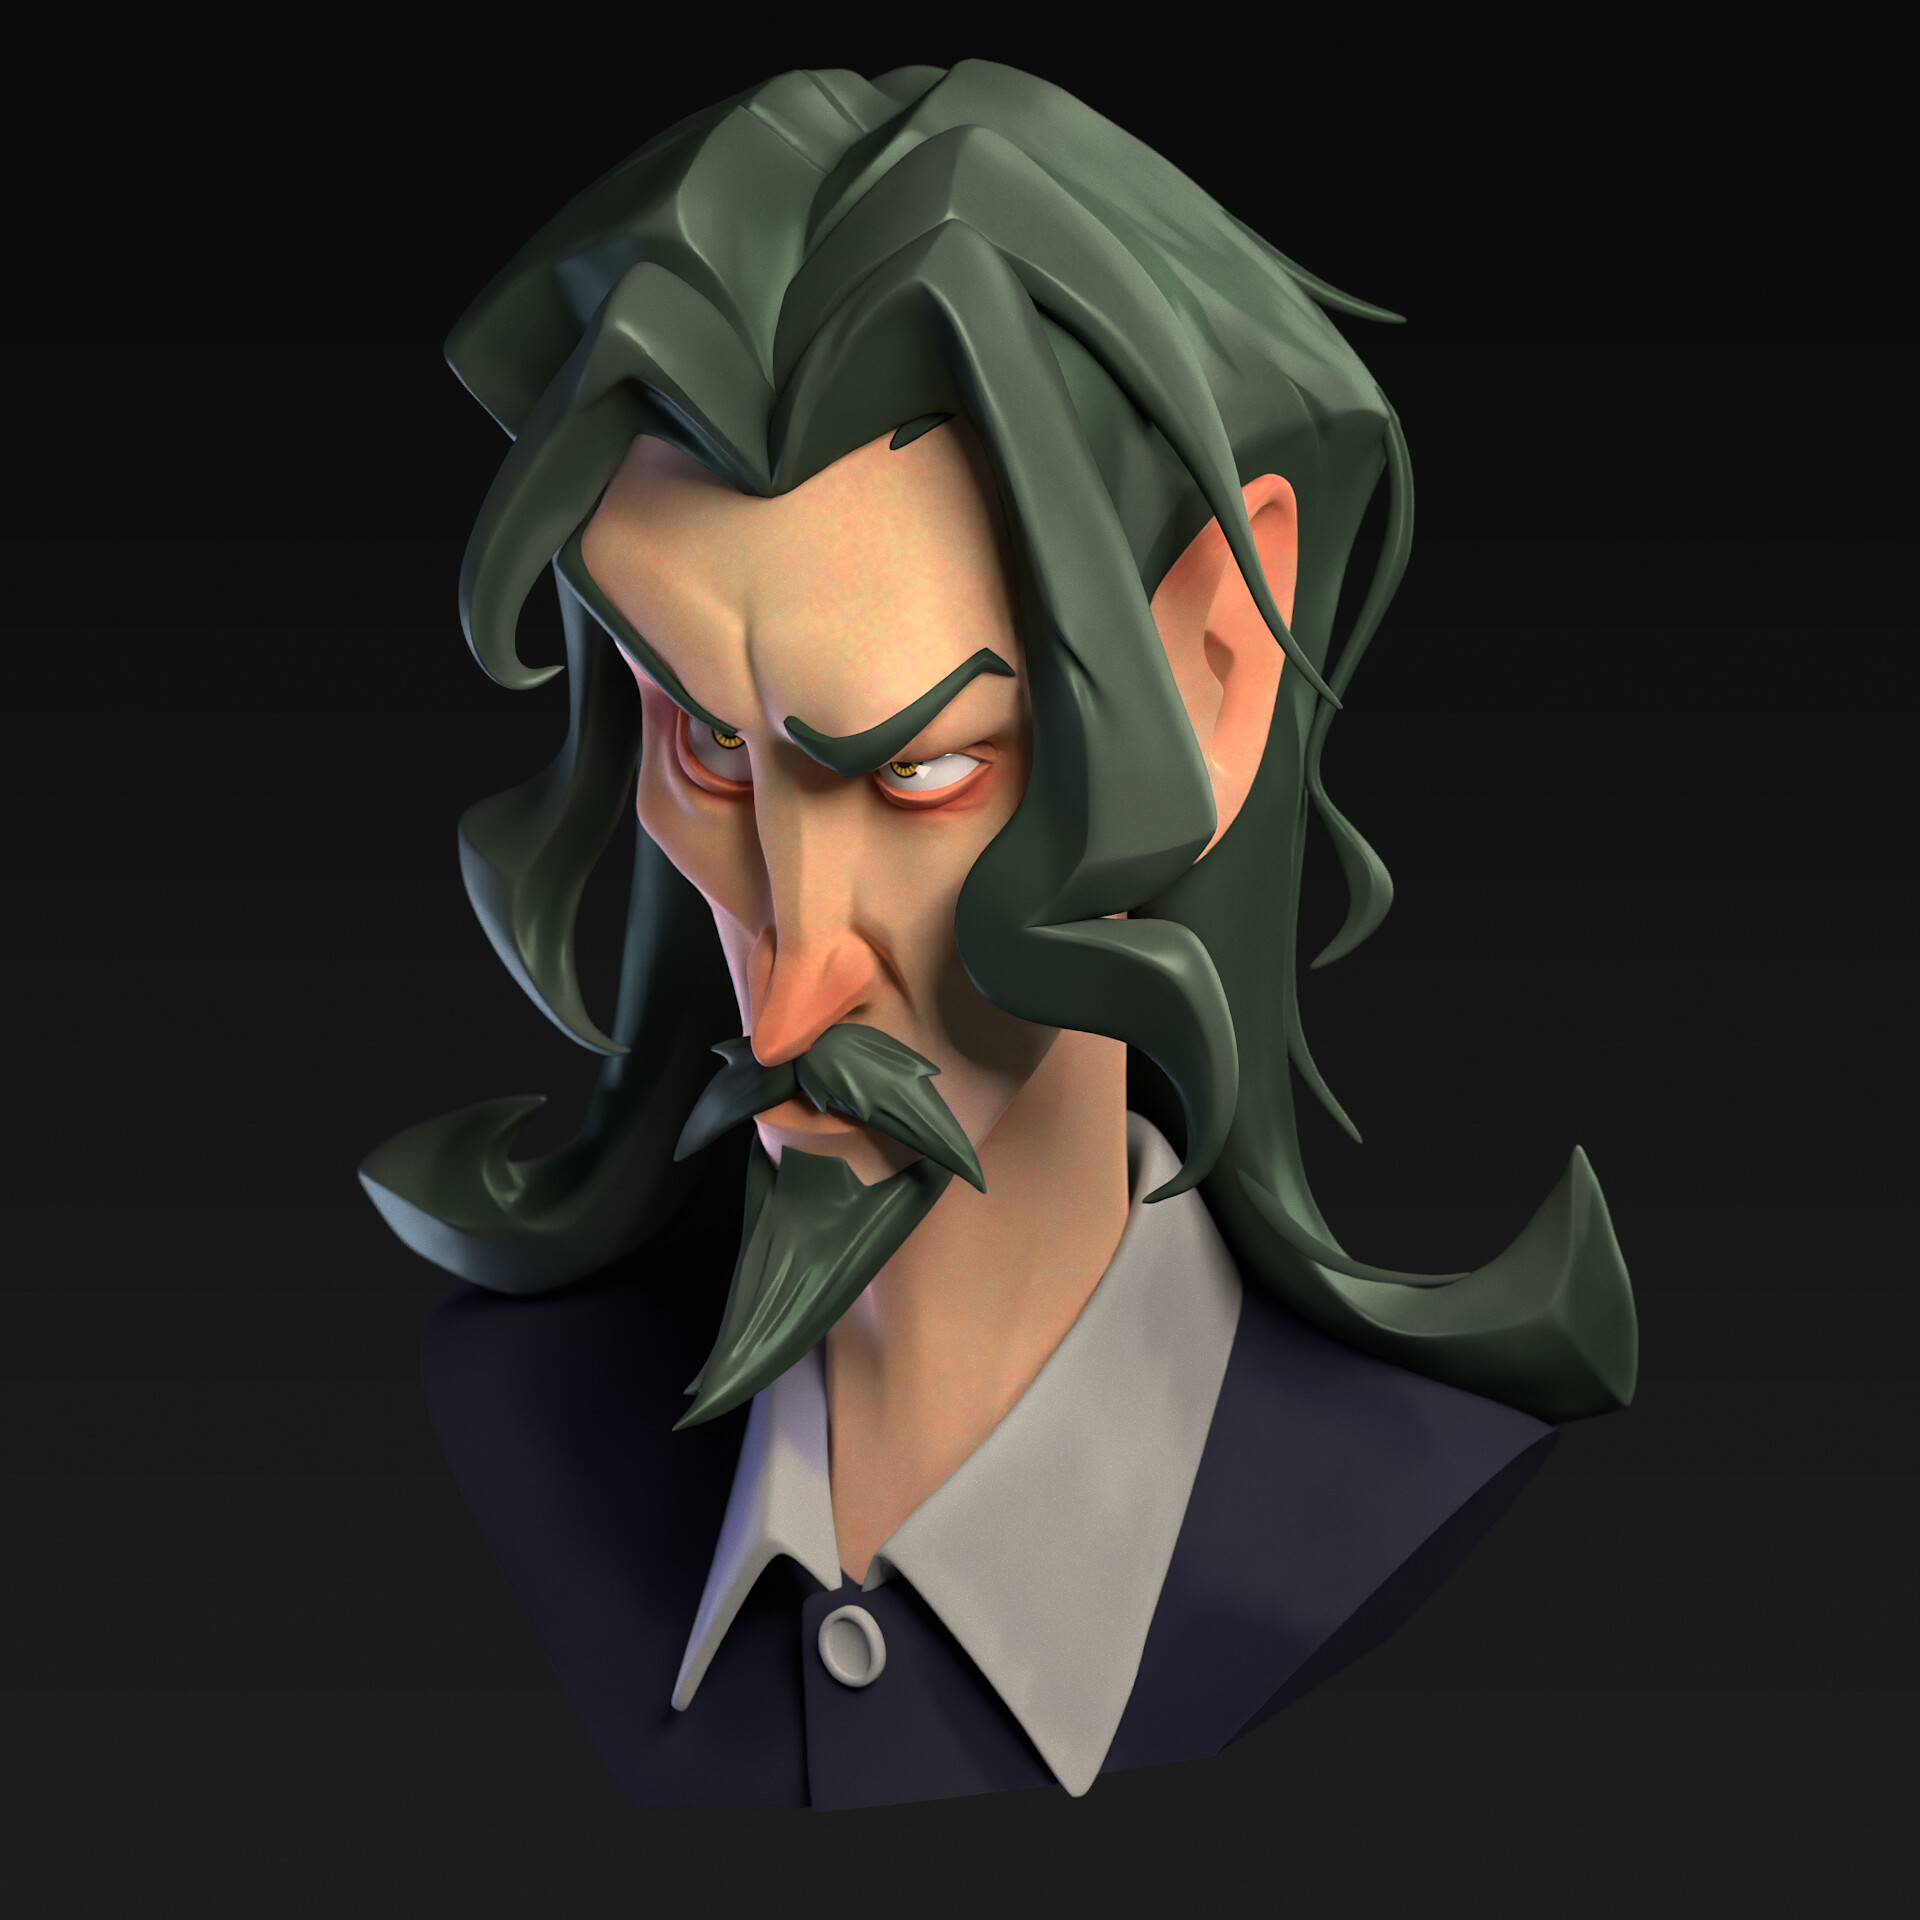 ArtStation - Character Bust in ZBrush